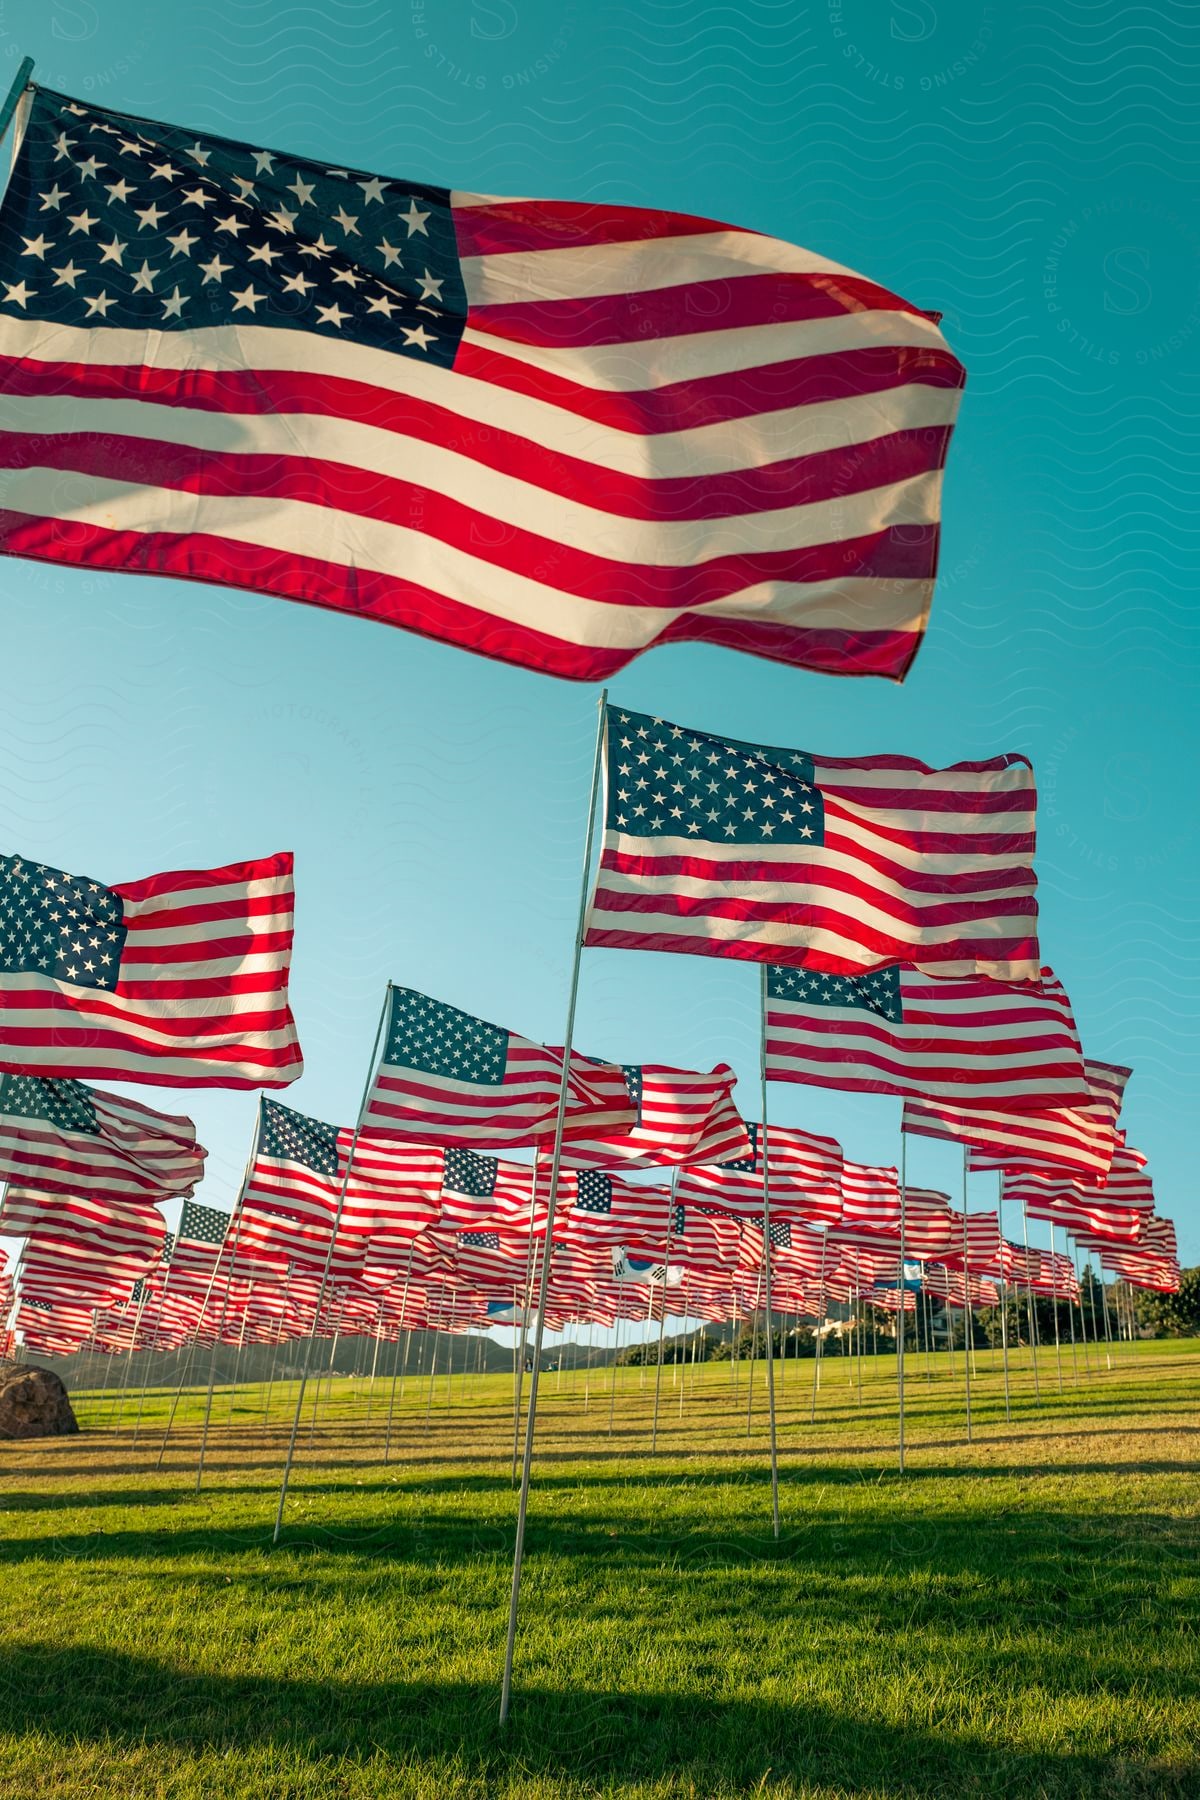 A field of us flagpoles in a grassy area under clear skies with flags blowing in the wind